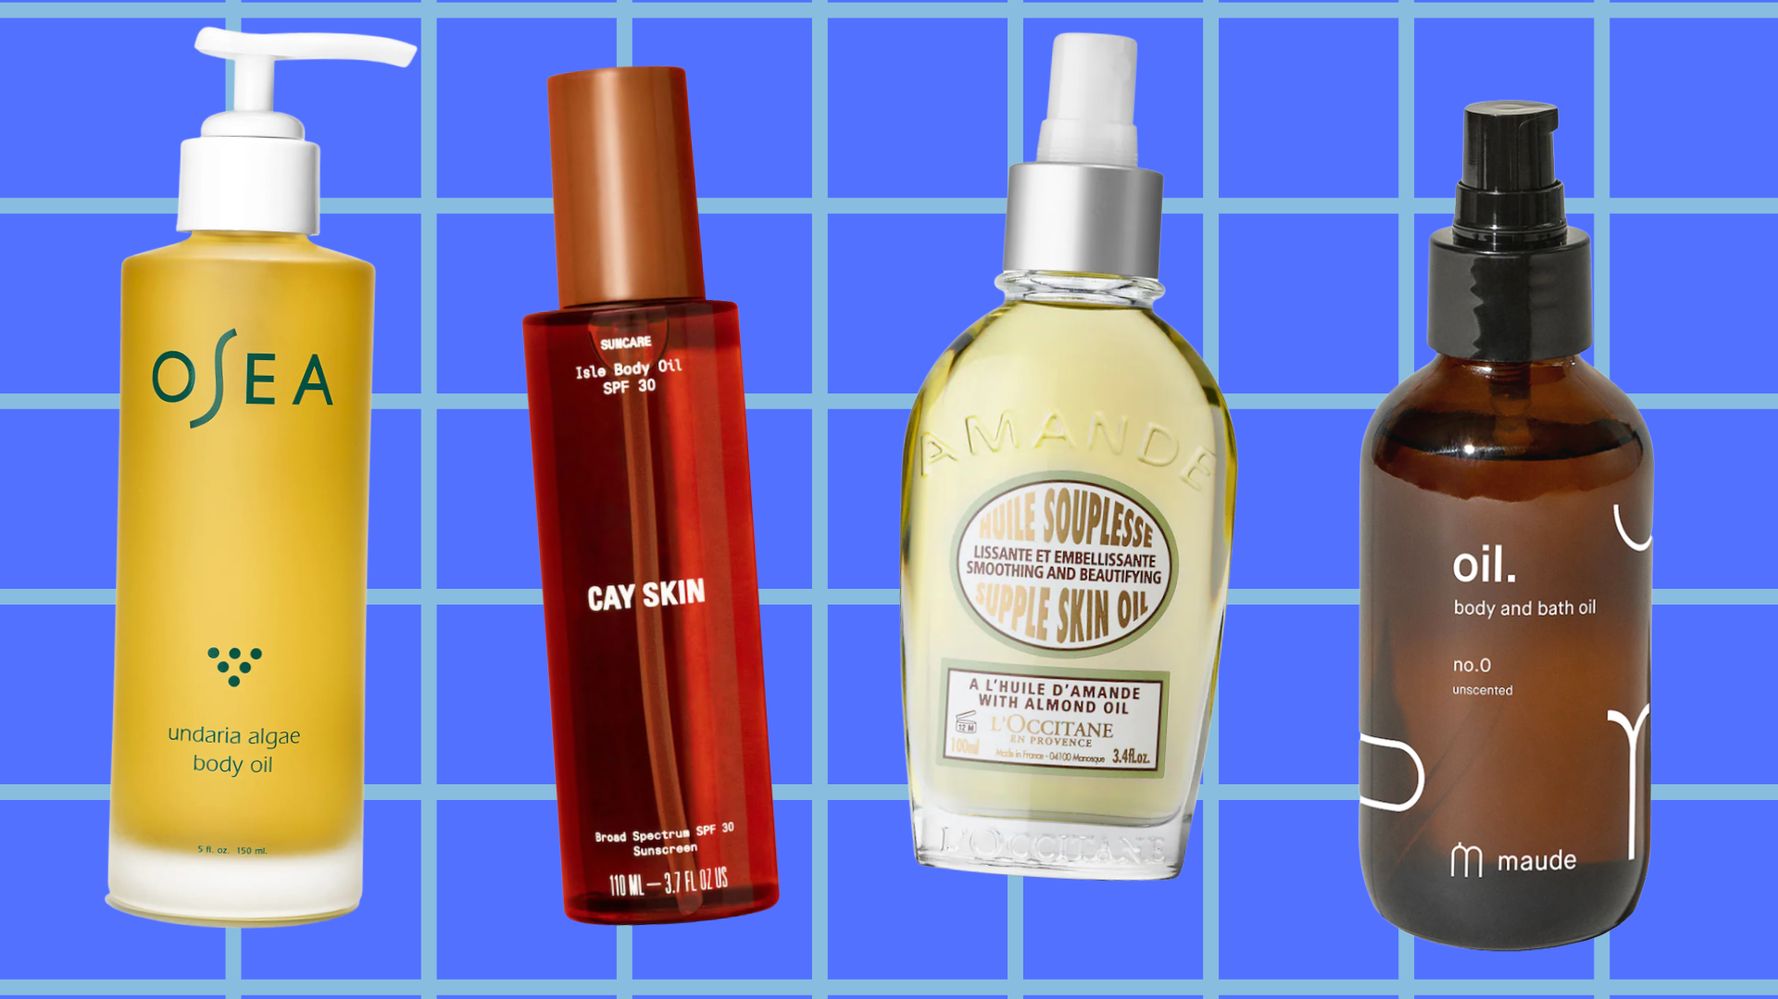 Don't Sleep On Body Oil For Soft, Smooth Skin